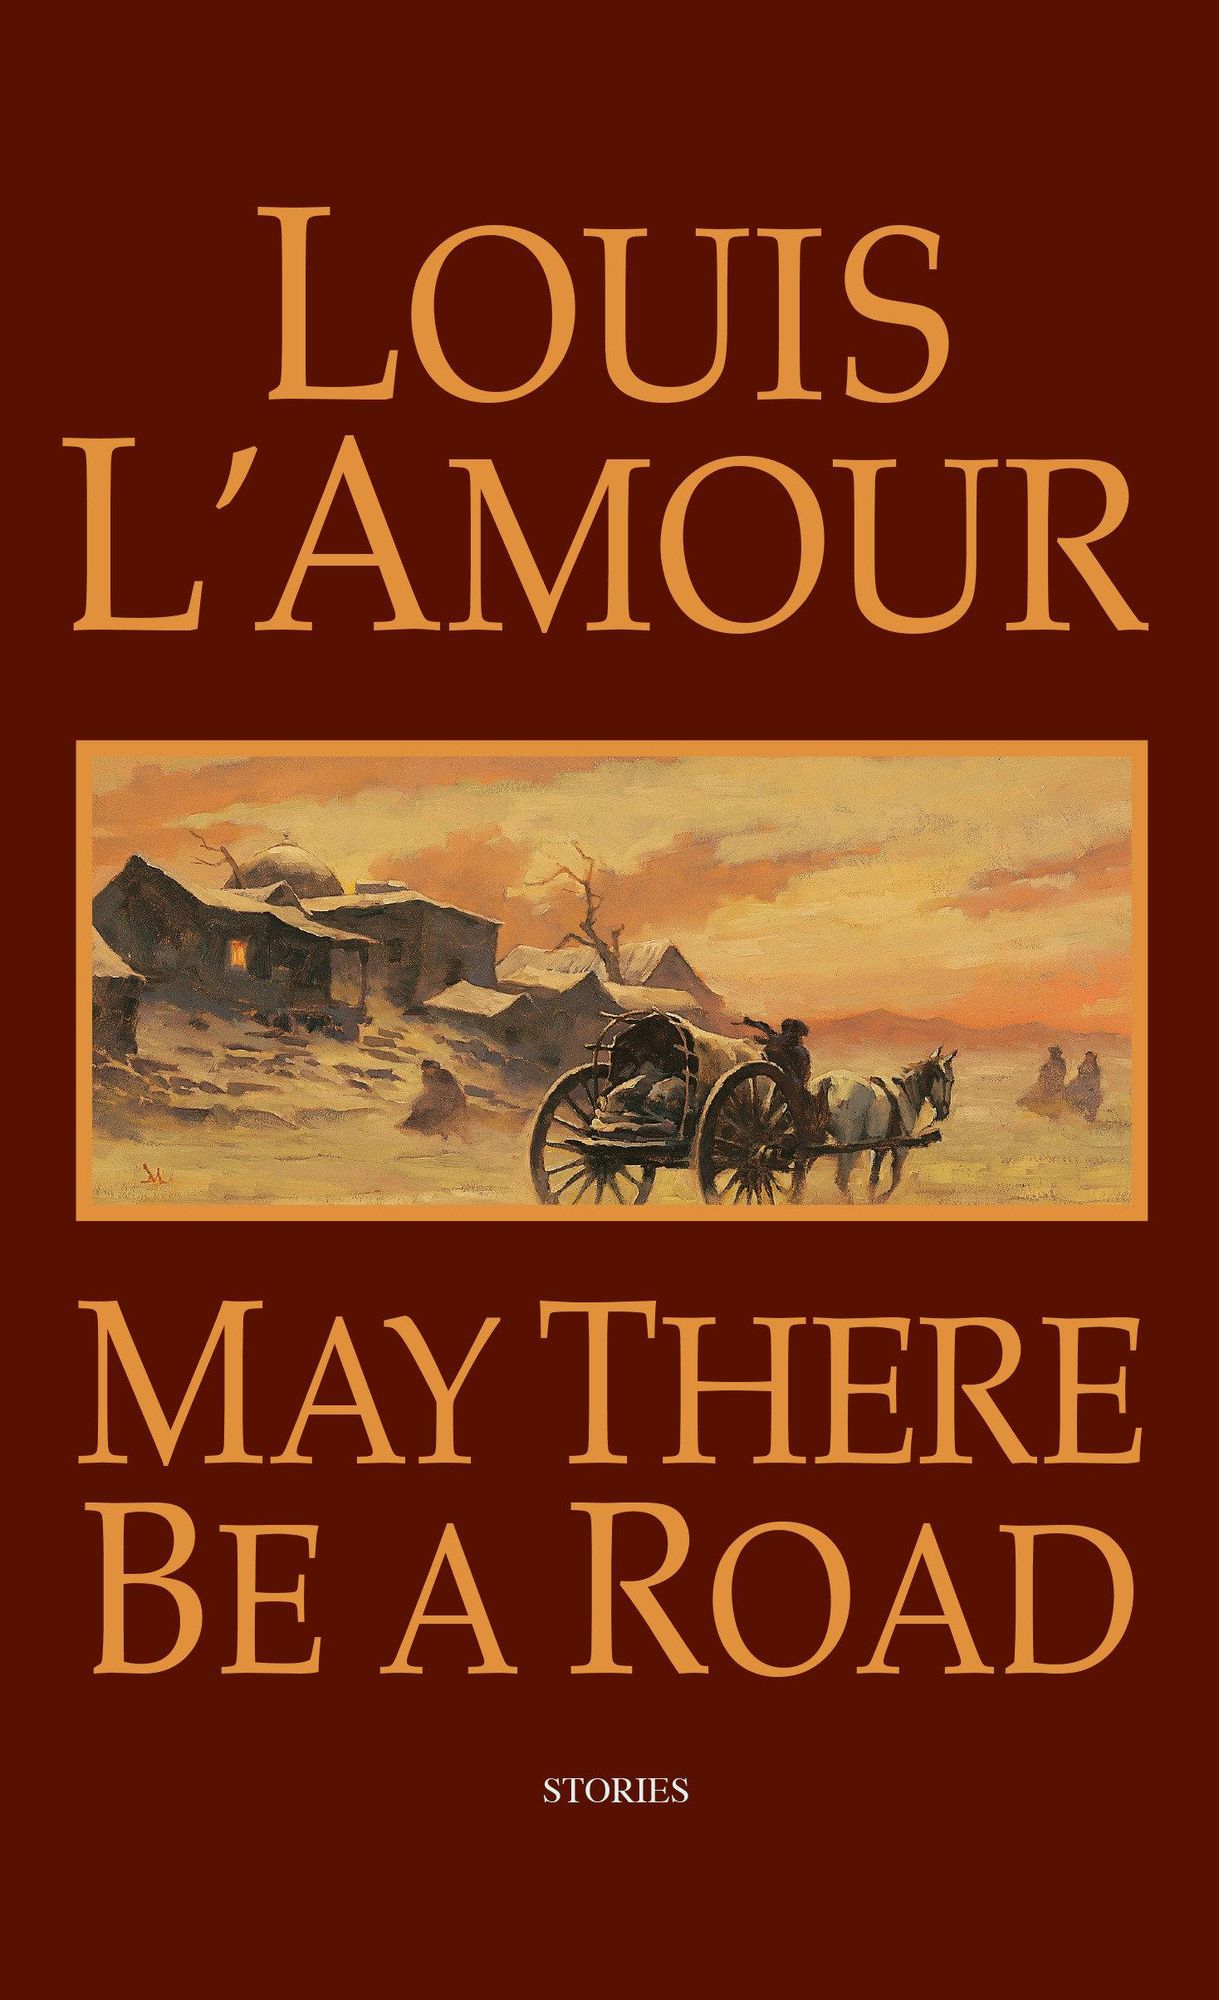 The Sacketts Volume One 5-Book Bundle eBook by Louis L'Amour - EPUB Book